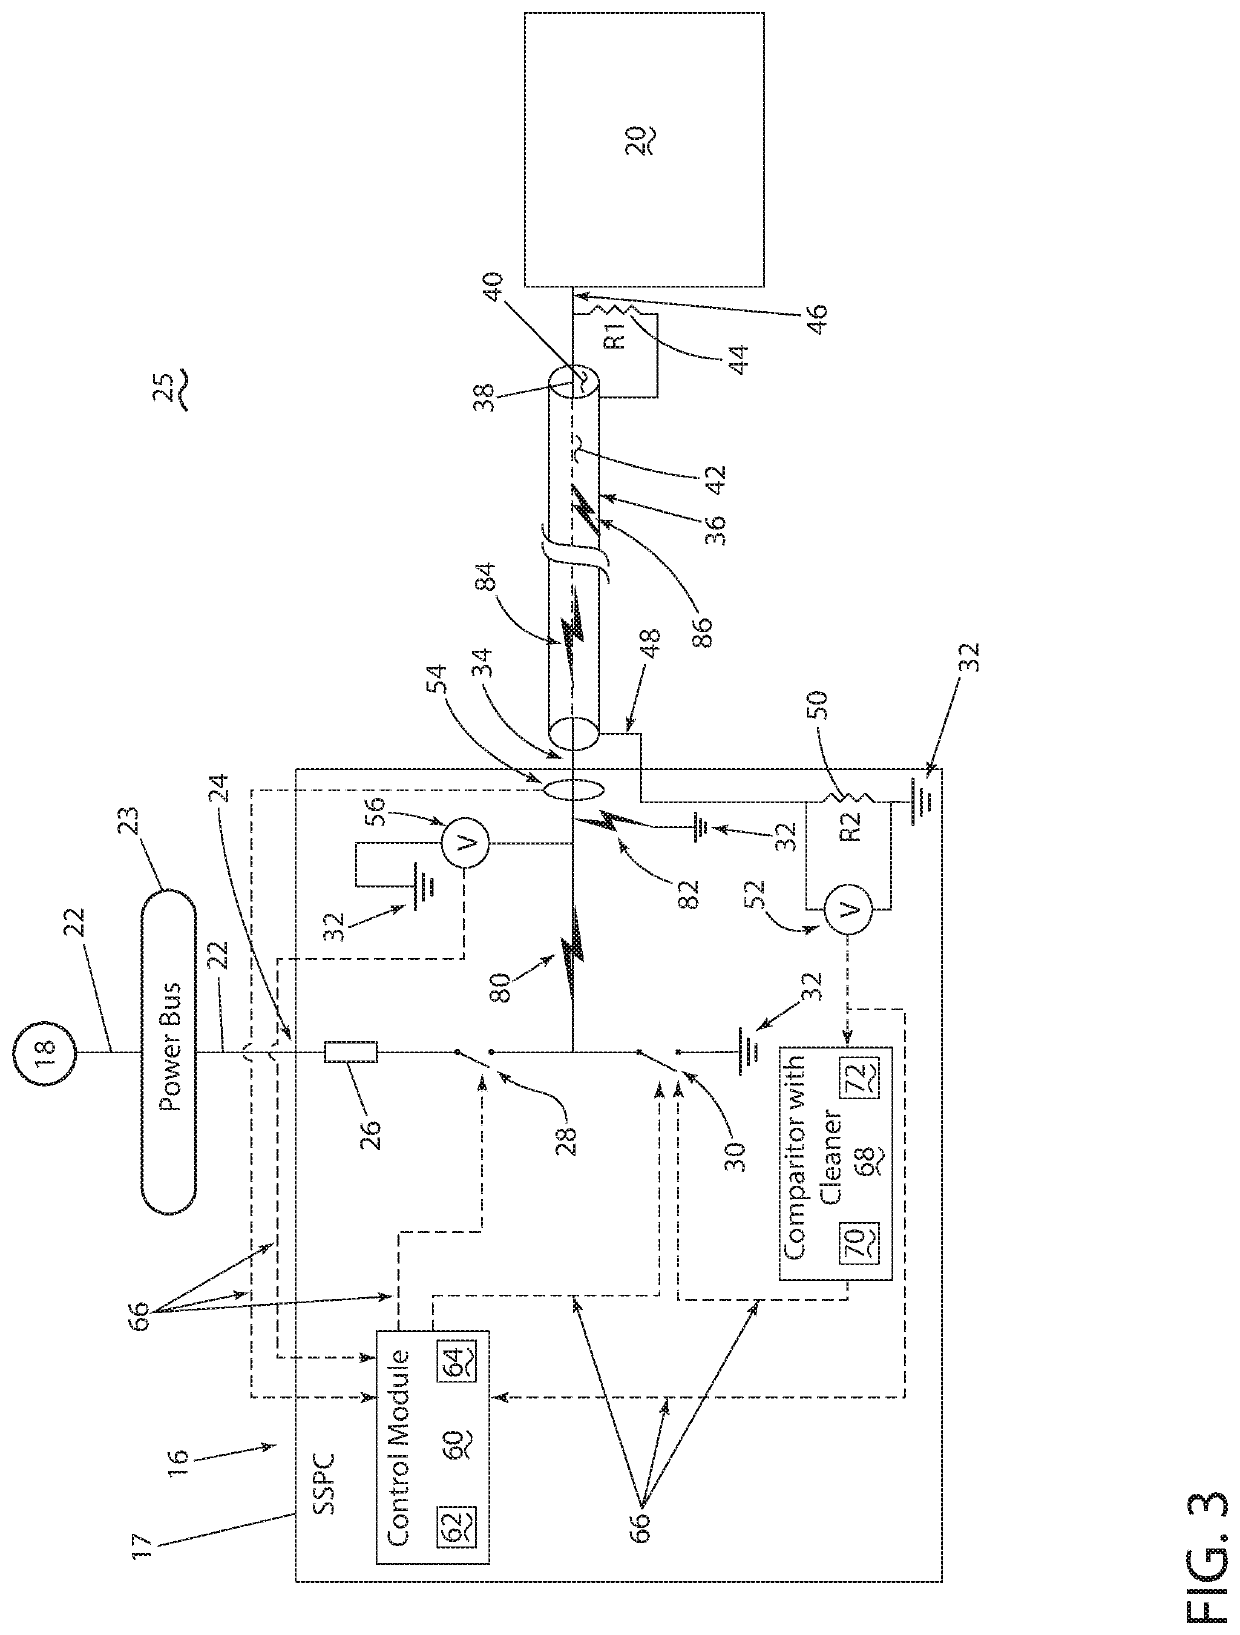 Method and circuit for detecting an arc fault